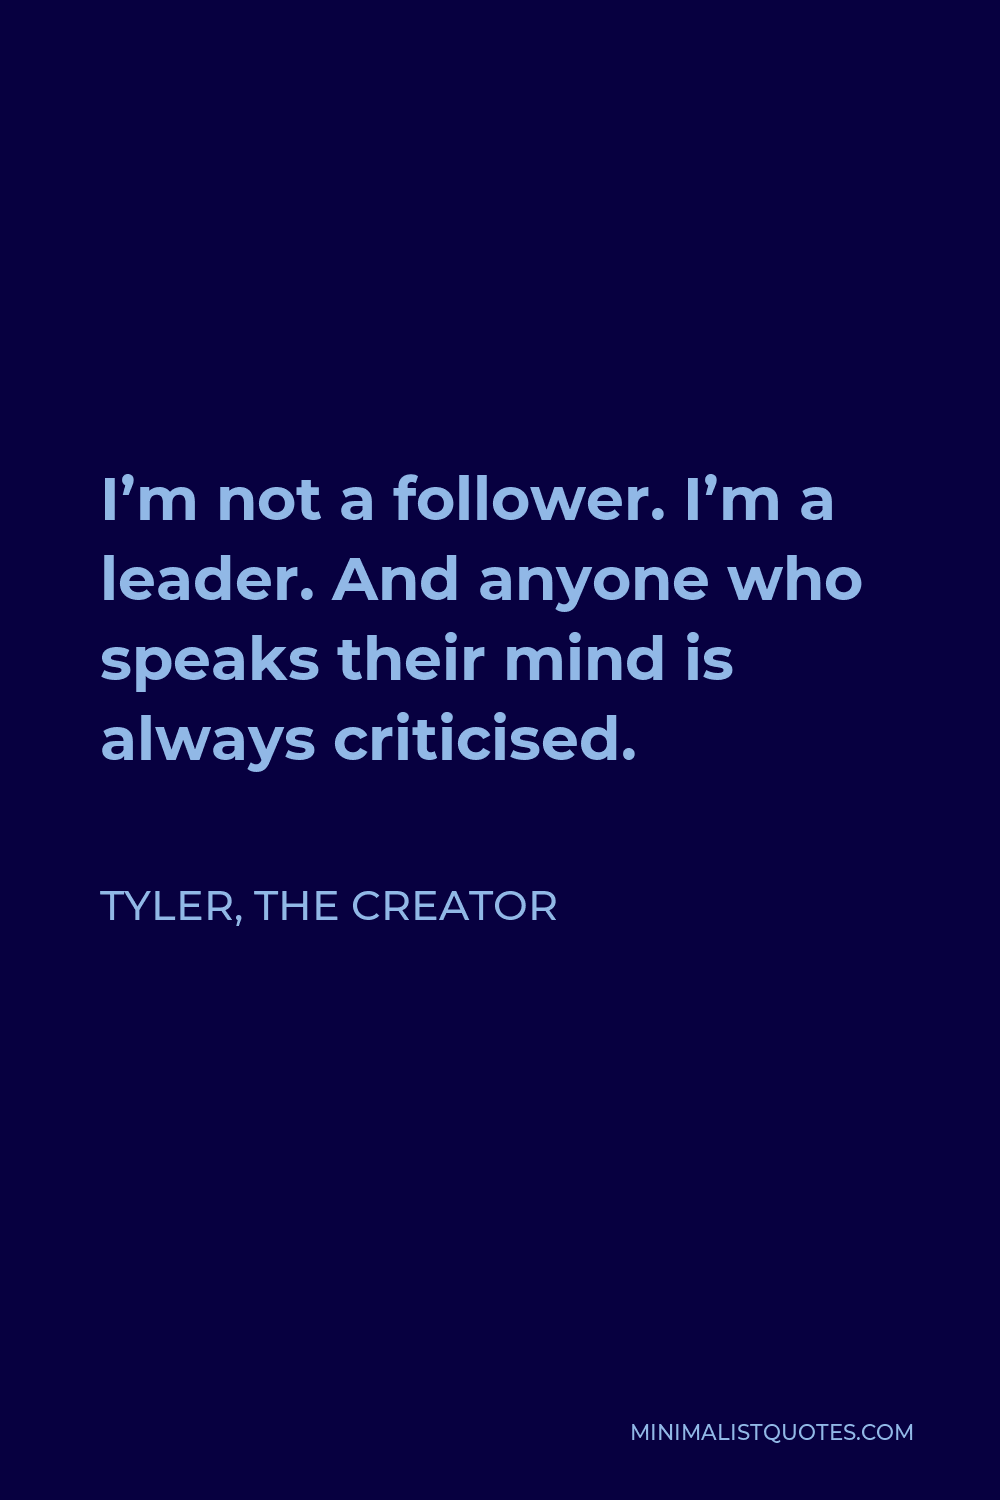 Tyler, the Creator Quote - I’m not a follower. I’m a leader. And anyone who speaks their mind is always criticised.